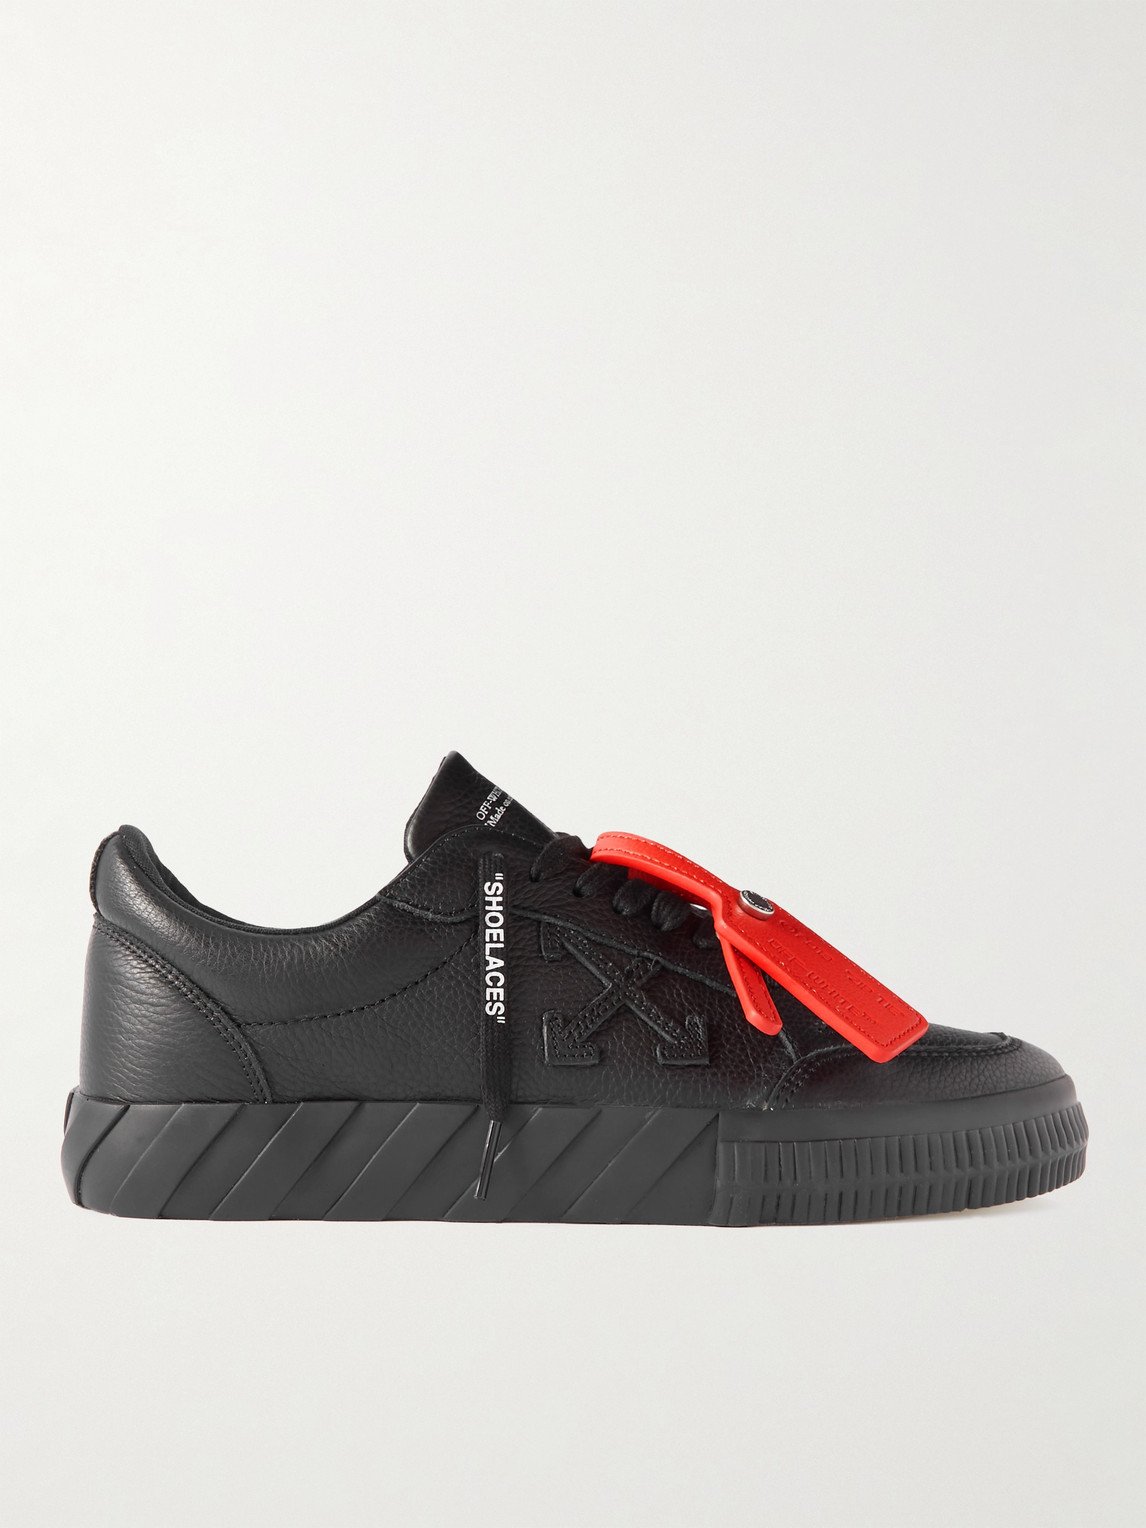 OFF-WHITE FULL-GRAIN LEATHER SNEAKERS